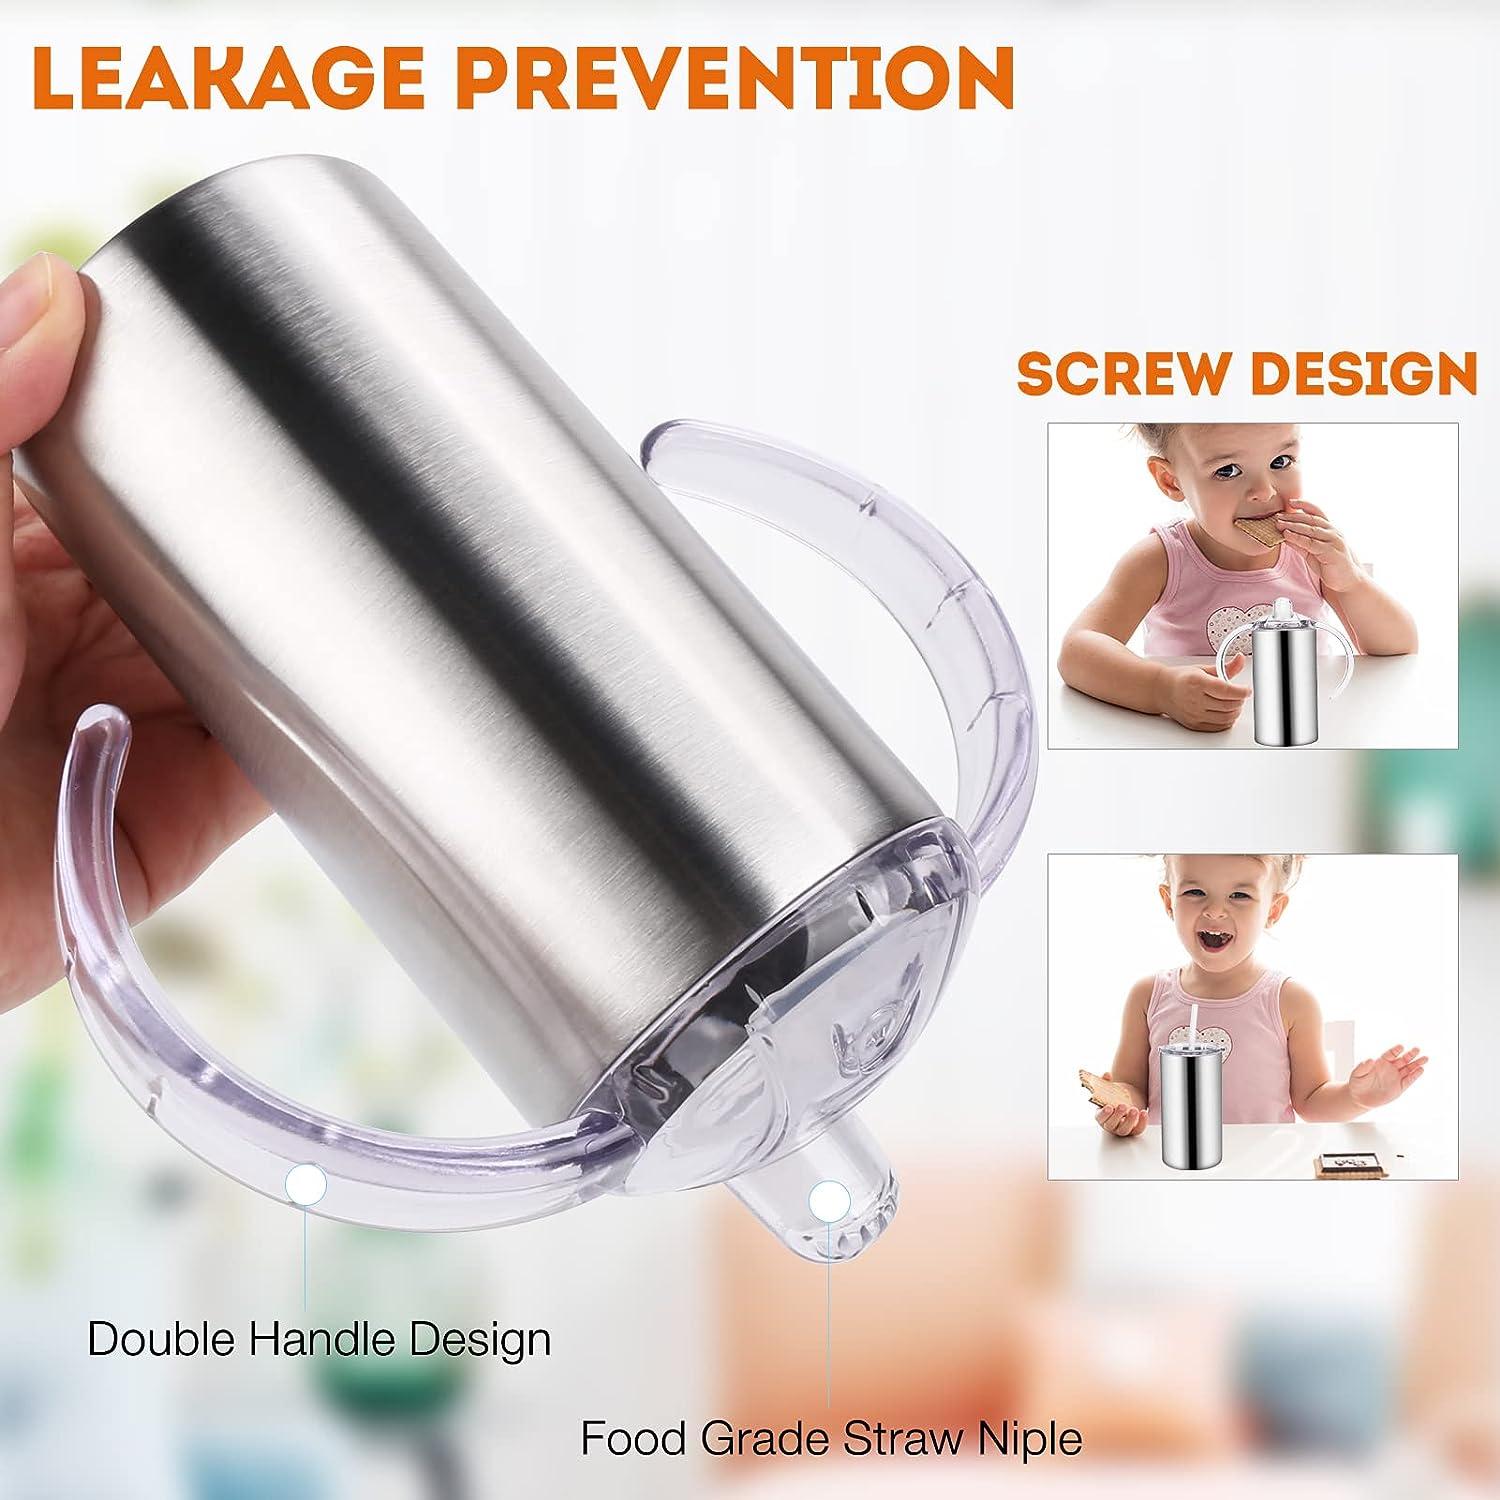 Stainless Steel Sippy Cup Double Vacuum Insulation Mug Toddler Baby Bottle  US